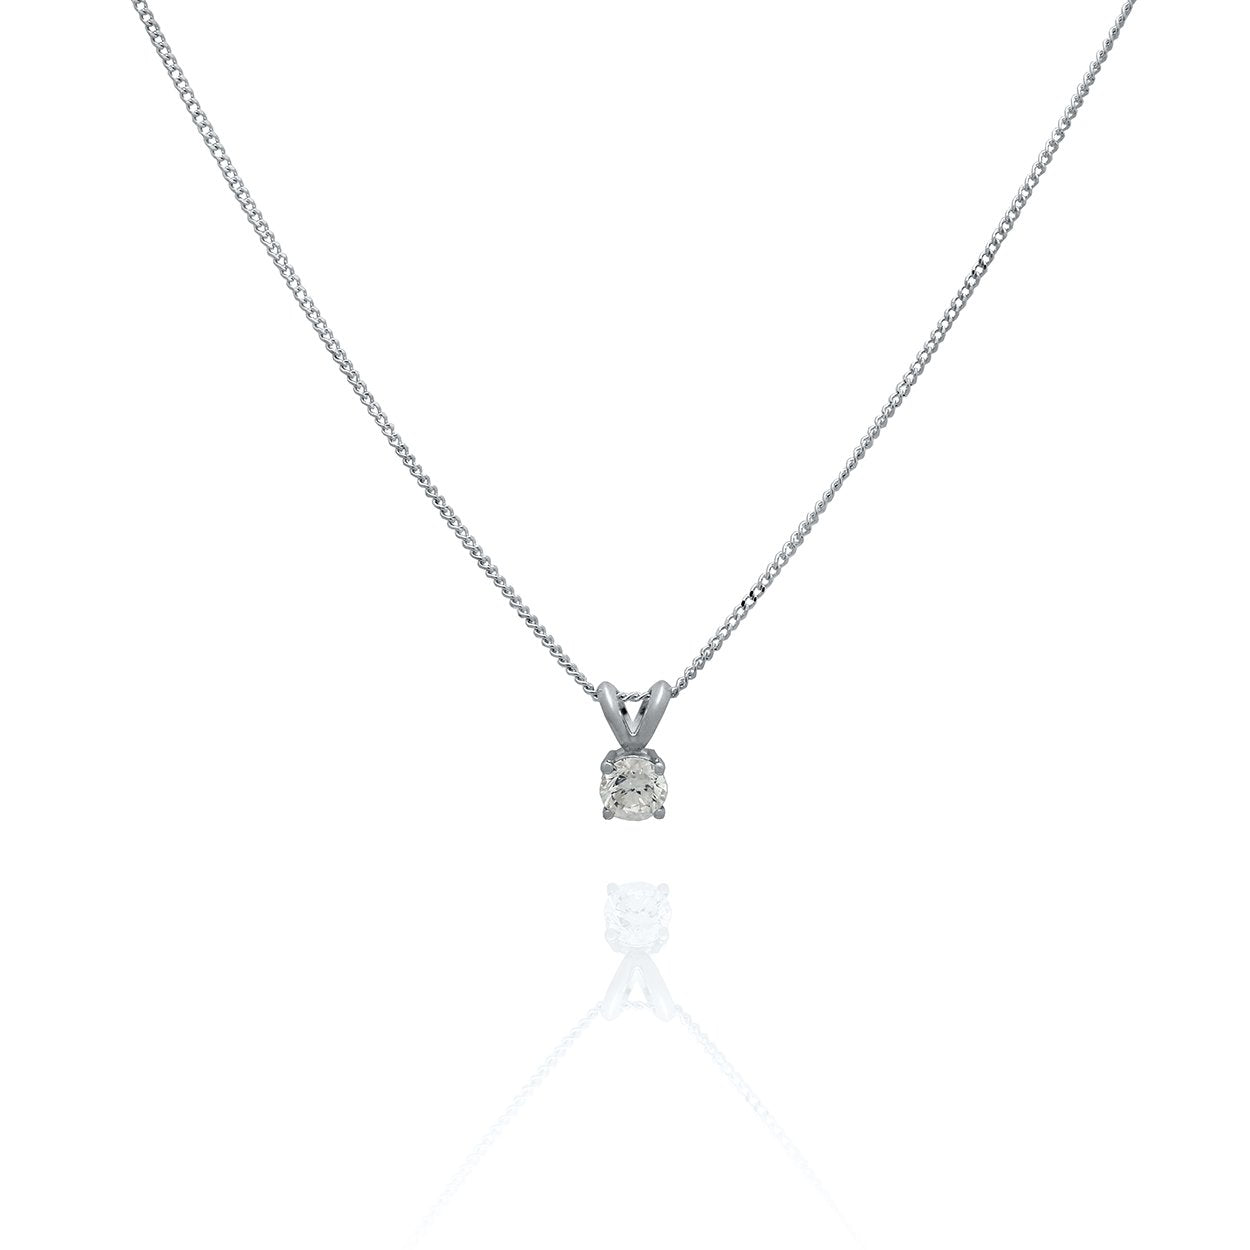 14KT White Gold Diamond Necklace with Curb Chain